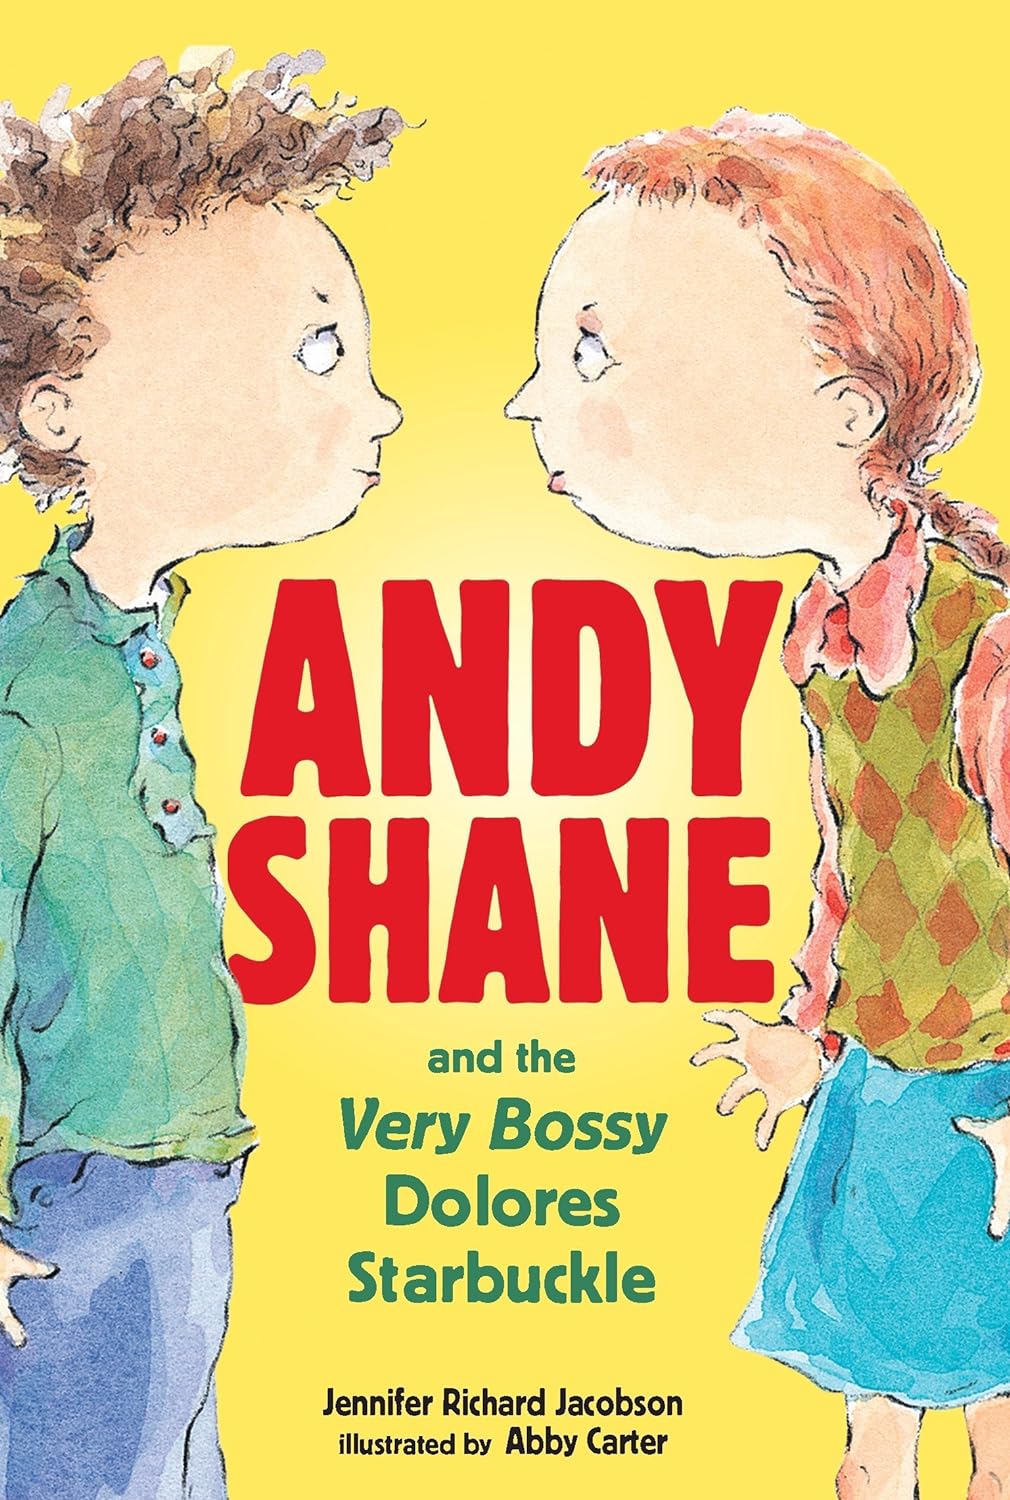 Andy Shane and the Very Bossy Dolores Starbuckle (paperback)  Jennifer Richard Jacobson